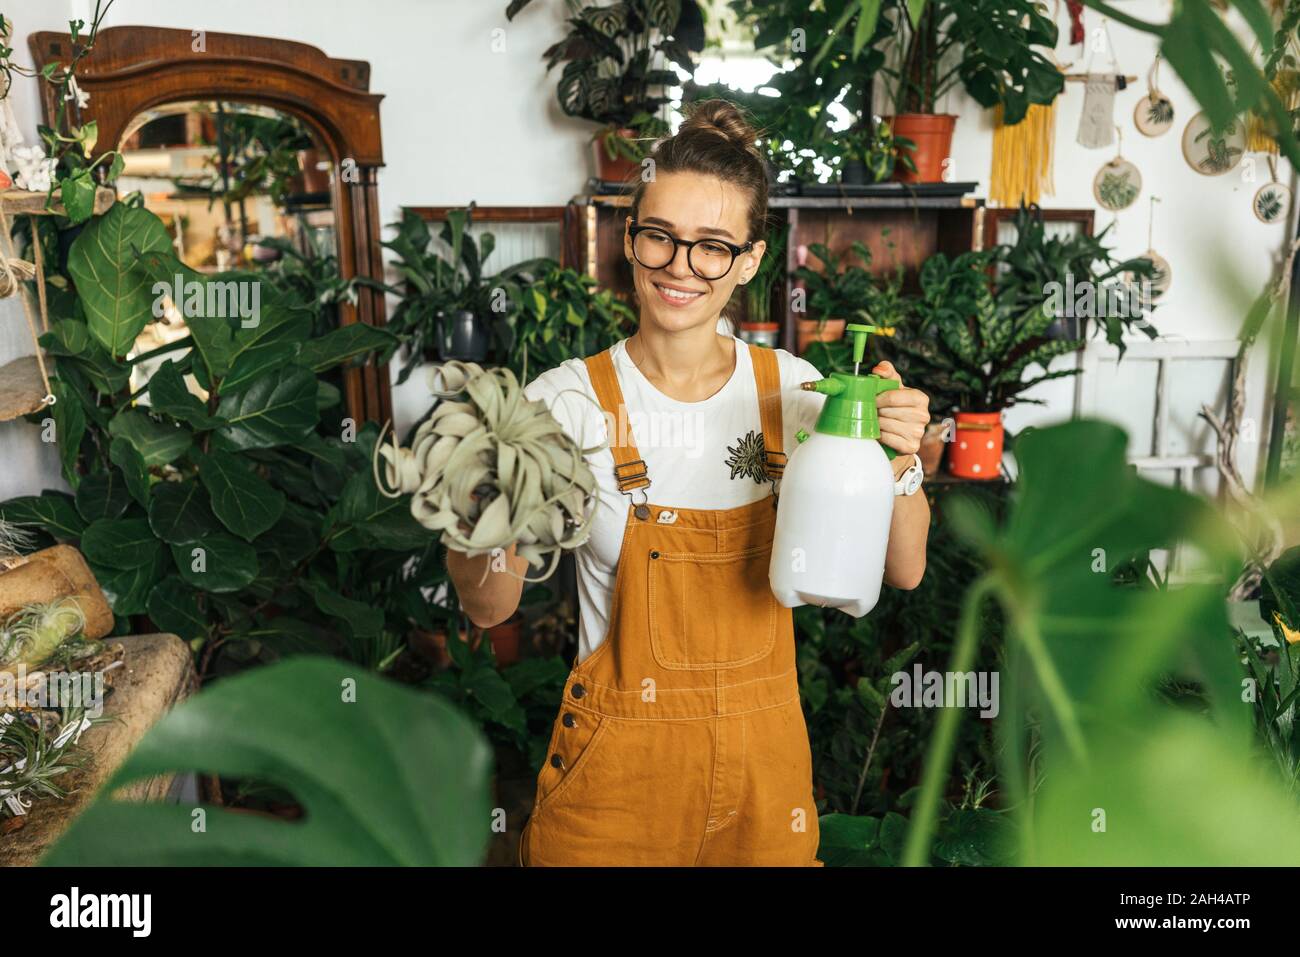 Smiling young woman caring for plants in a small shop Stock Photo